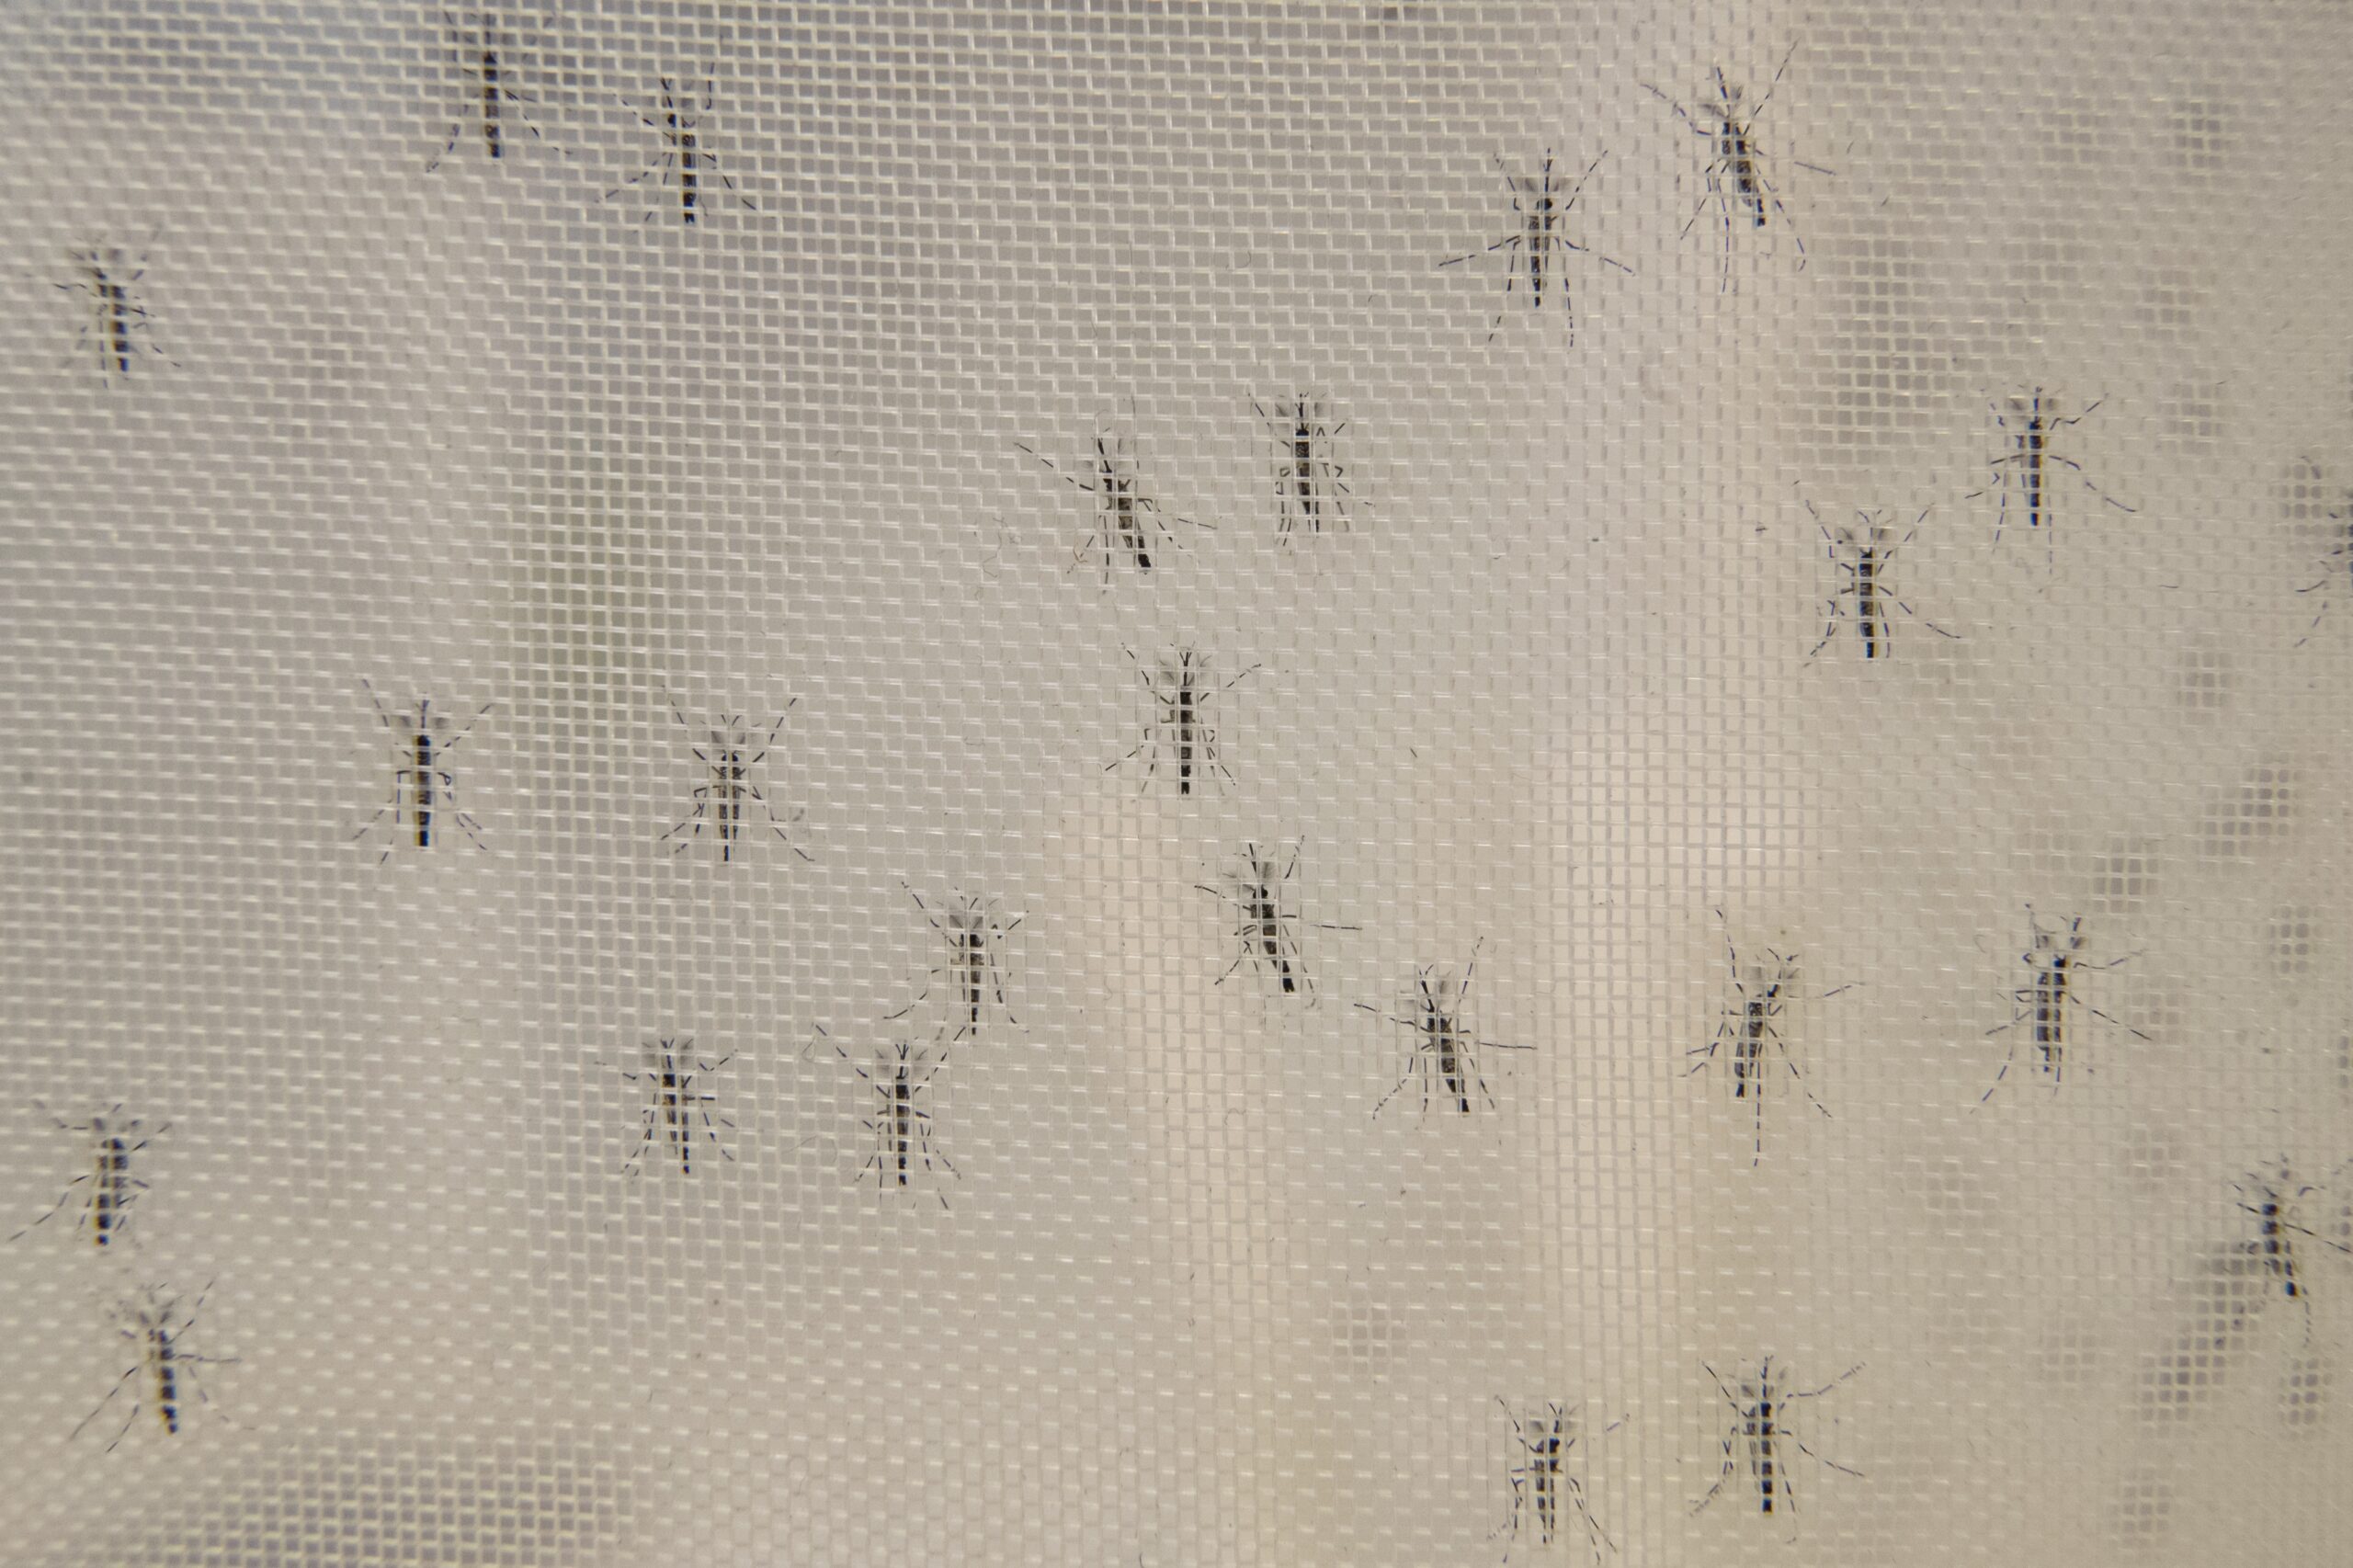 Male mosquitos